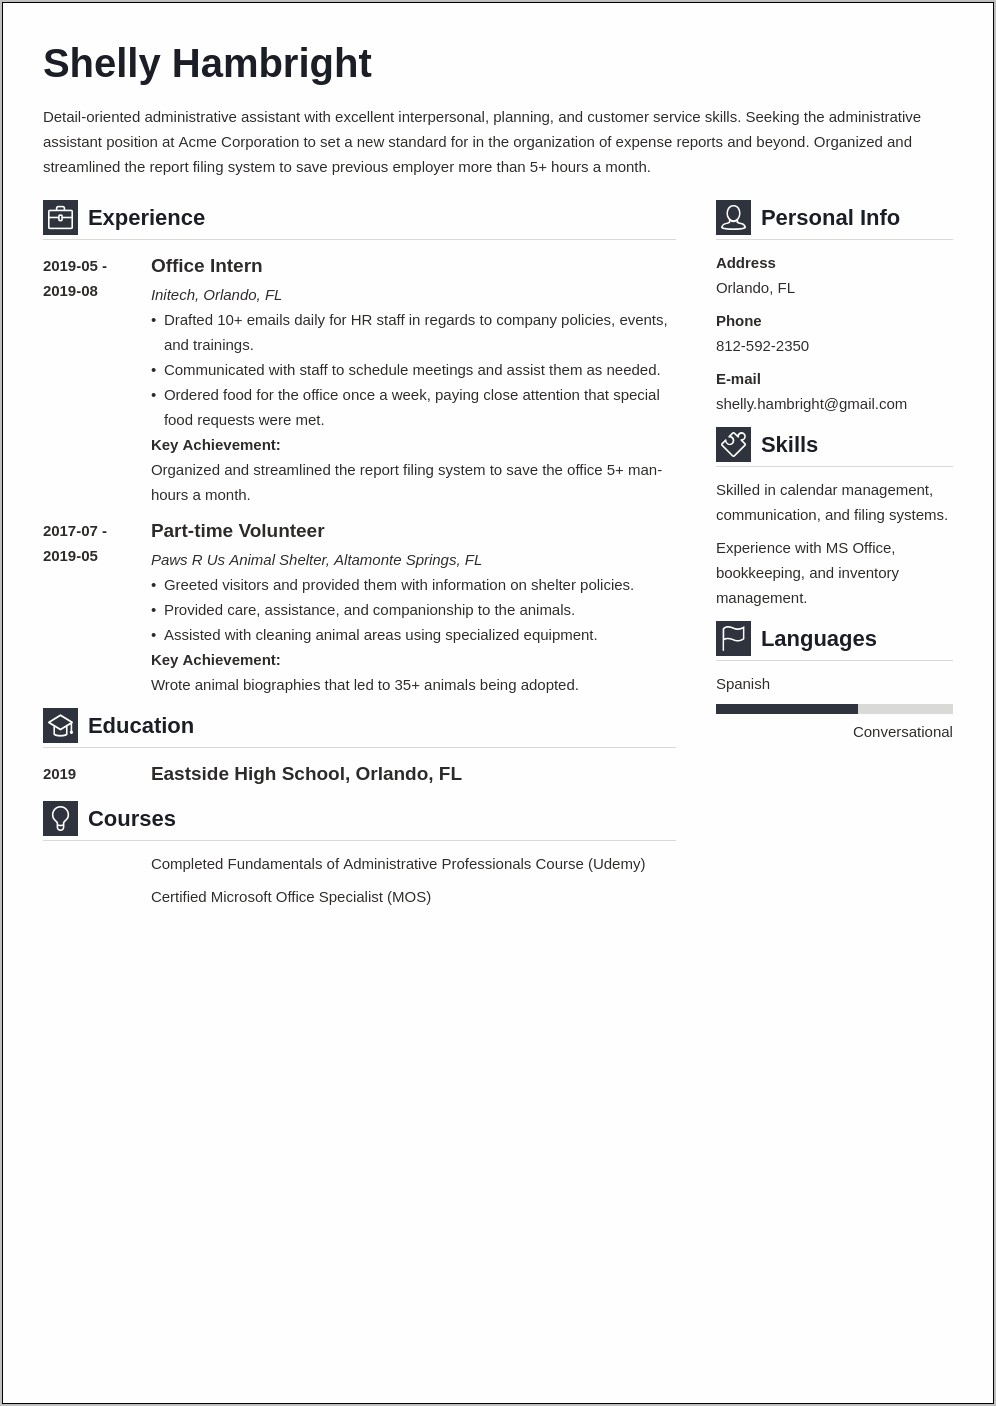 Professional Administrative Assistant Resume Objective